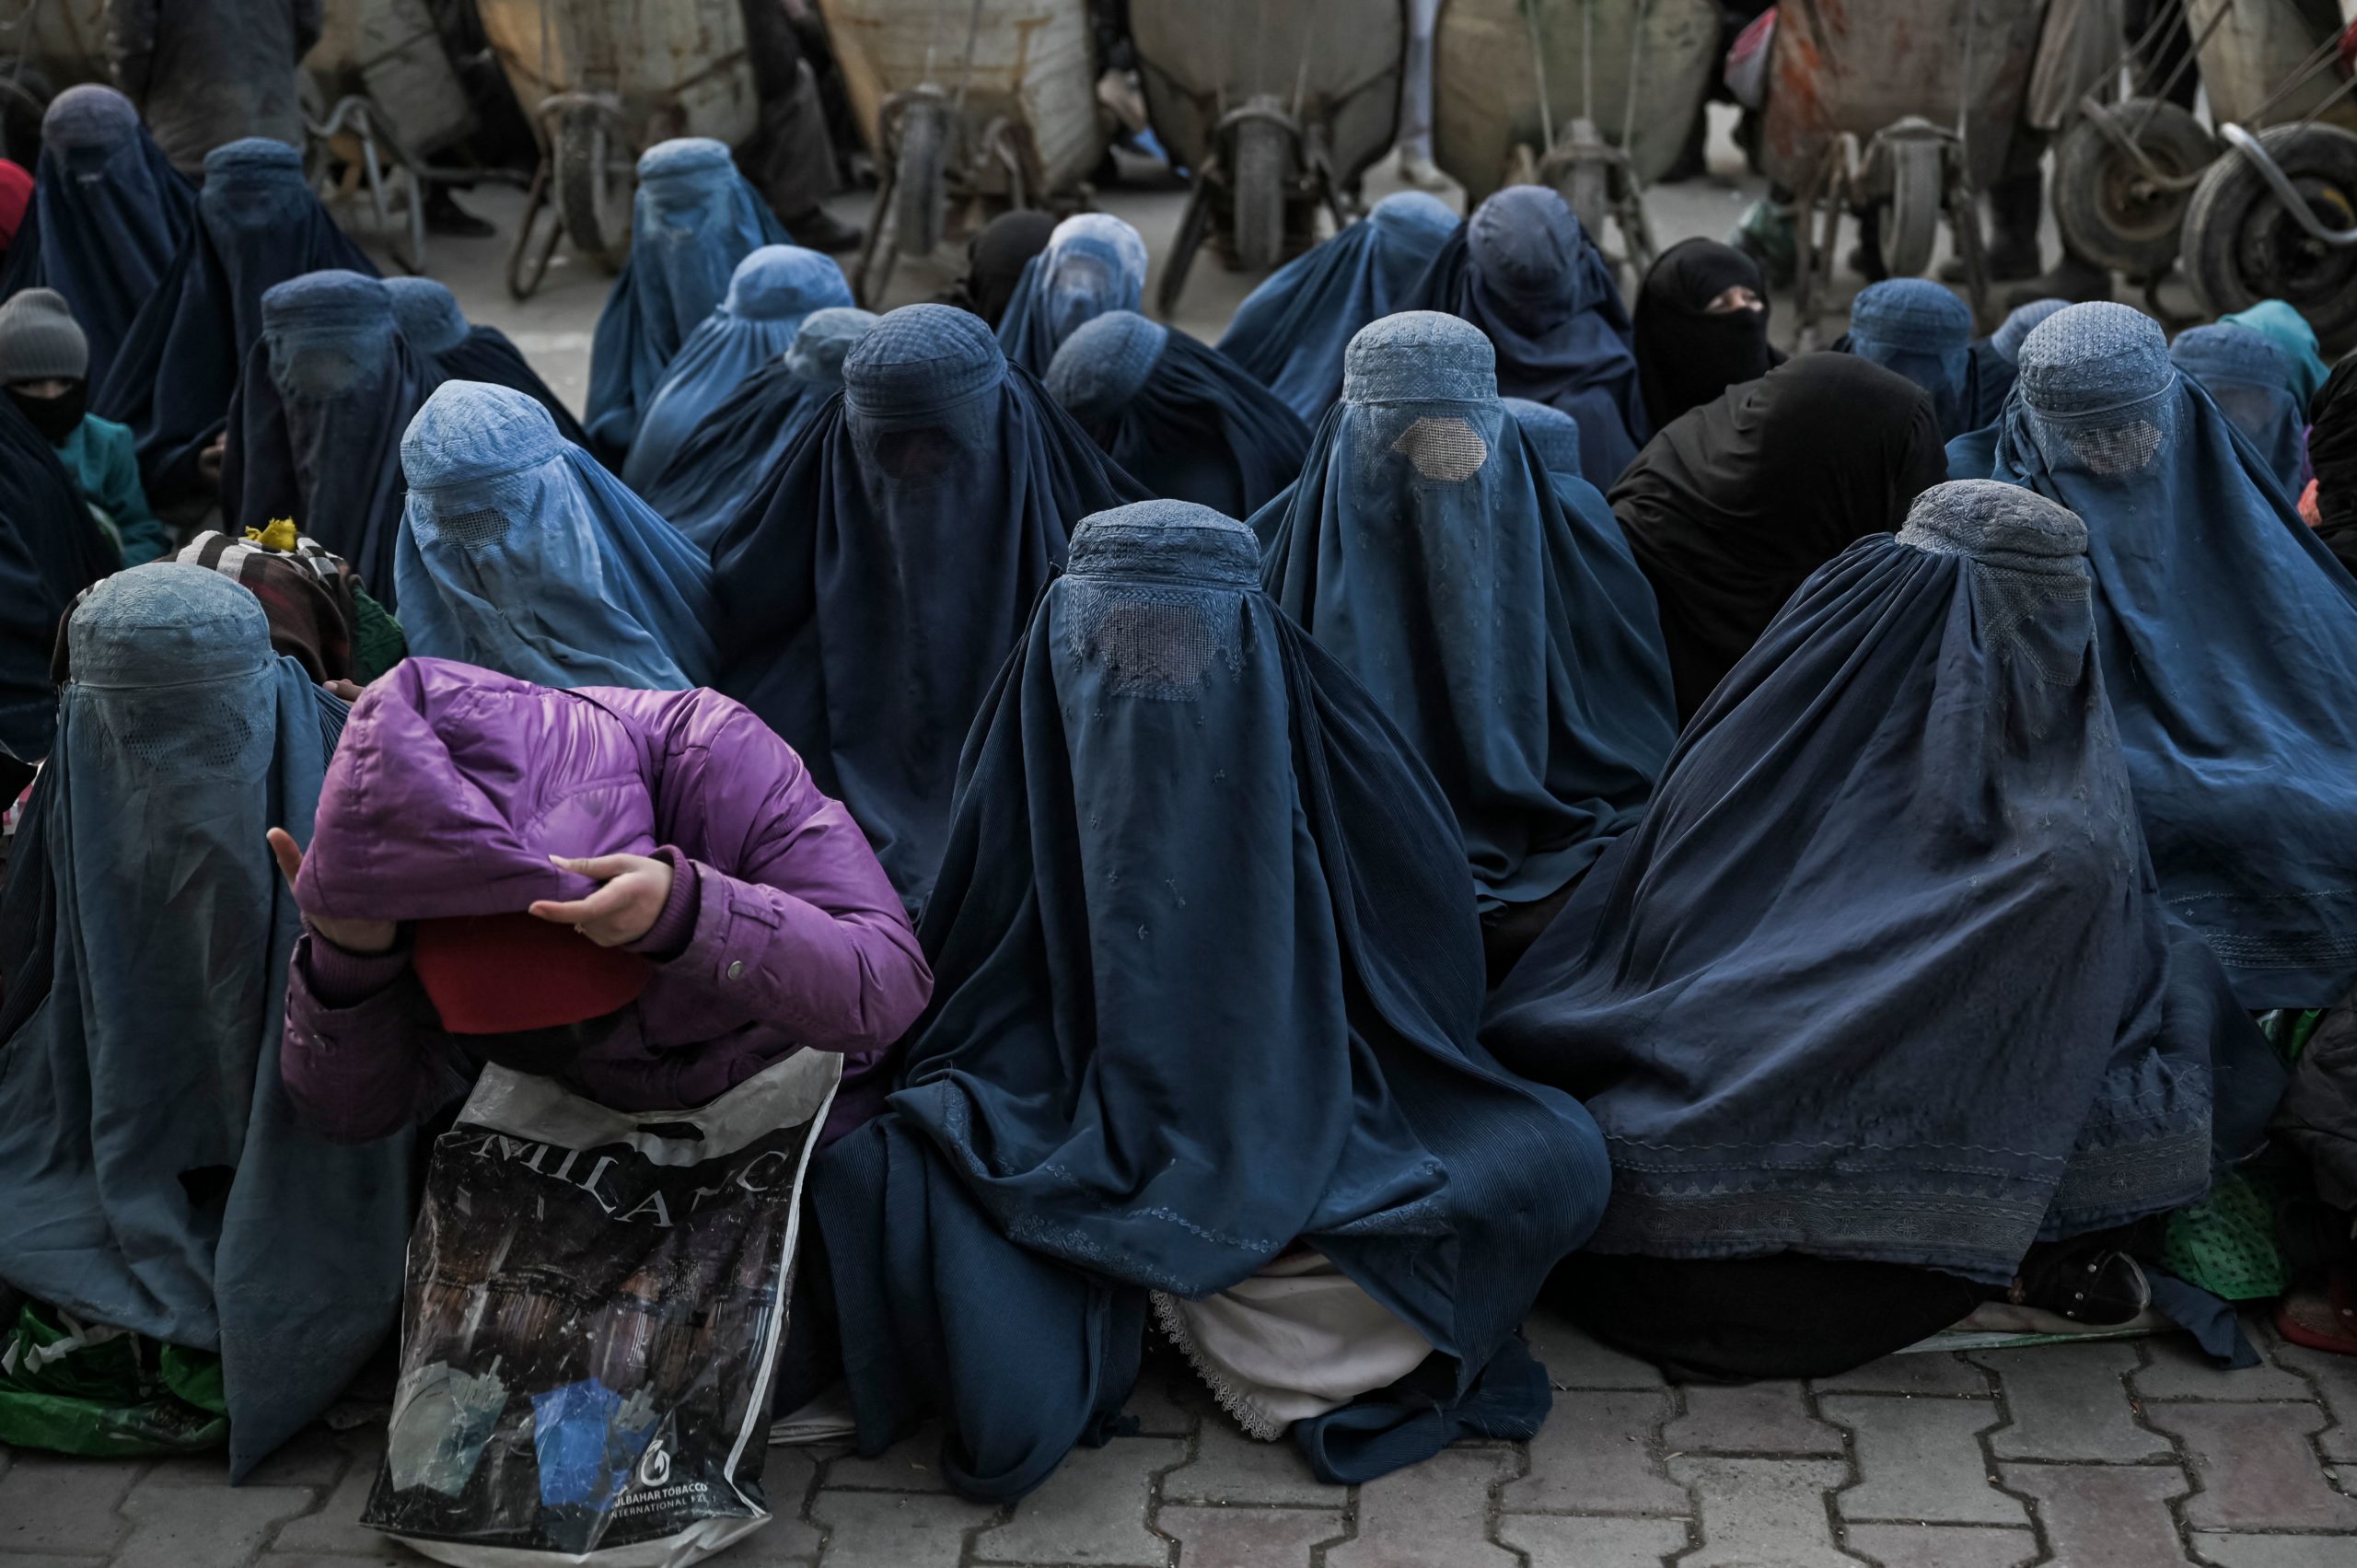 Women wearing a burqa wait for free bread in front of a bakery in Kabul on January 24, 2022. (Photo by Mohd RASFAN / AFP) (Photo by MOHD RASFAN/AFP via Getty Images)